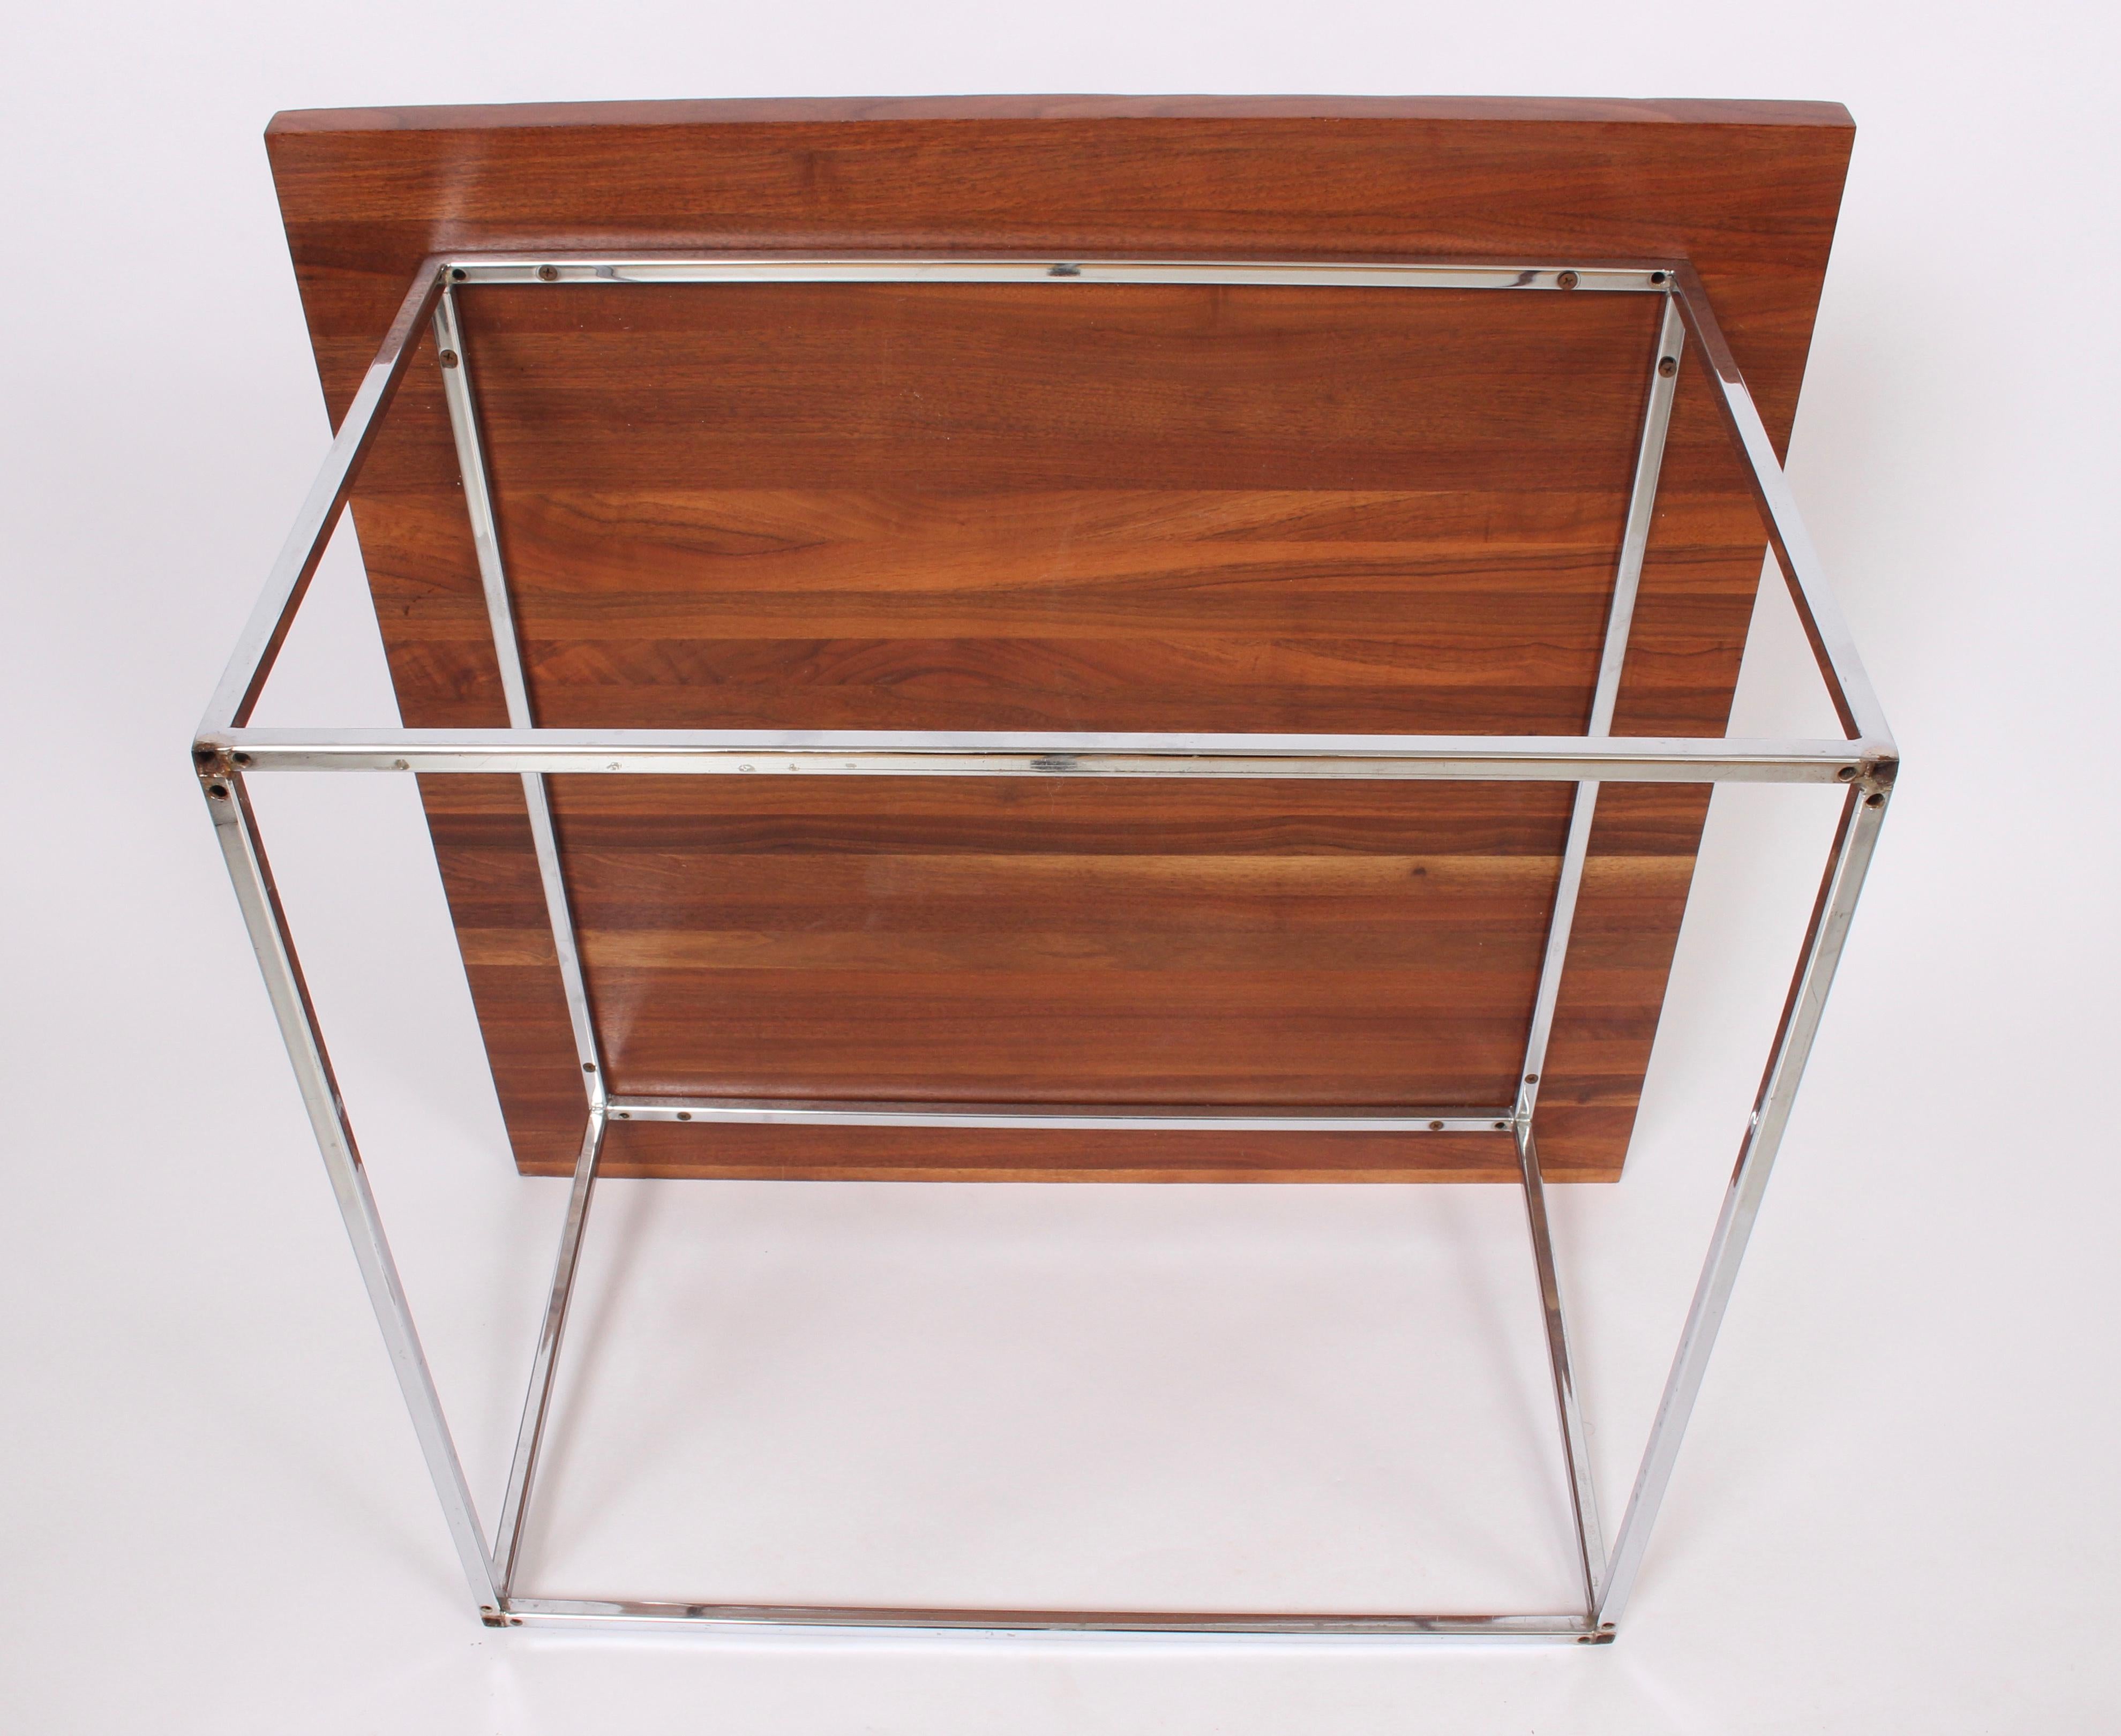 Milo Baughman Solid Black Walnut and Chrome Square Coffee Table, circa 1970 For Sale 3